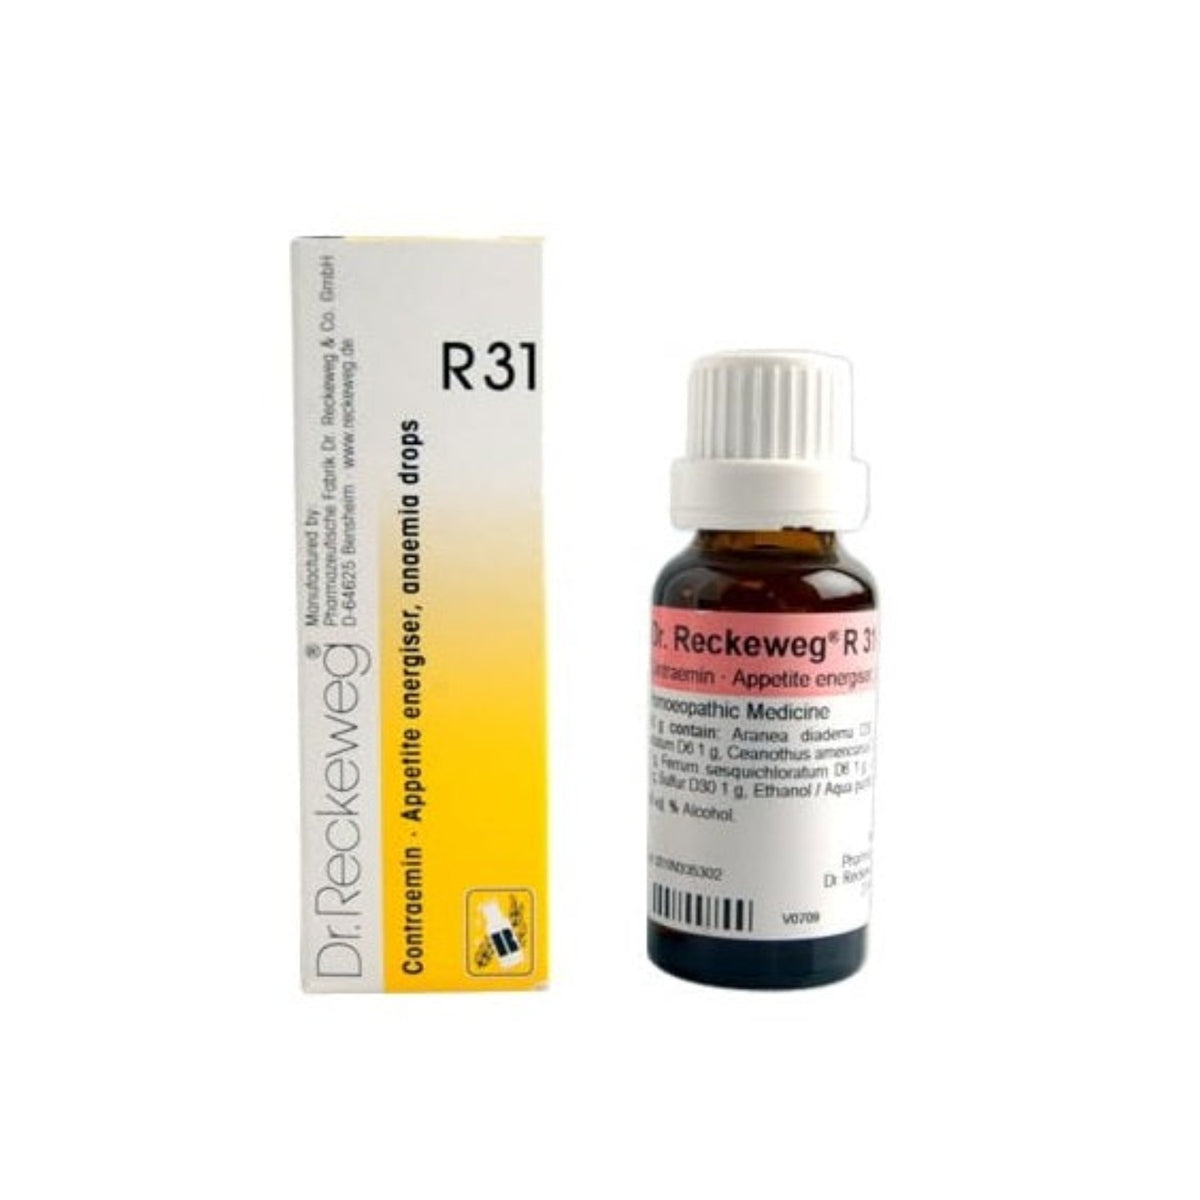 Dr Reckeweg Homoeopathy R31 Increases Appetite And Blood Supply Drops 22 ml